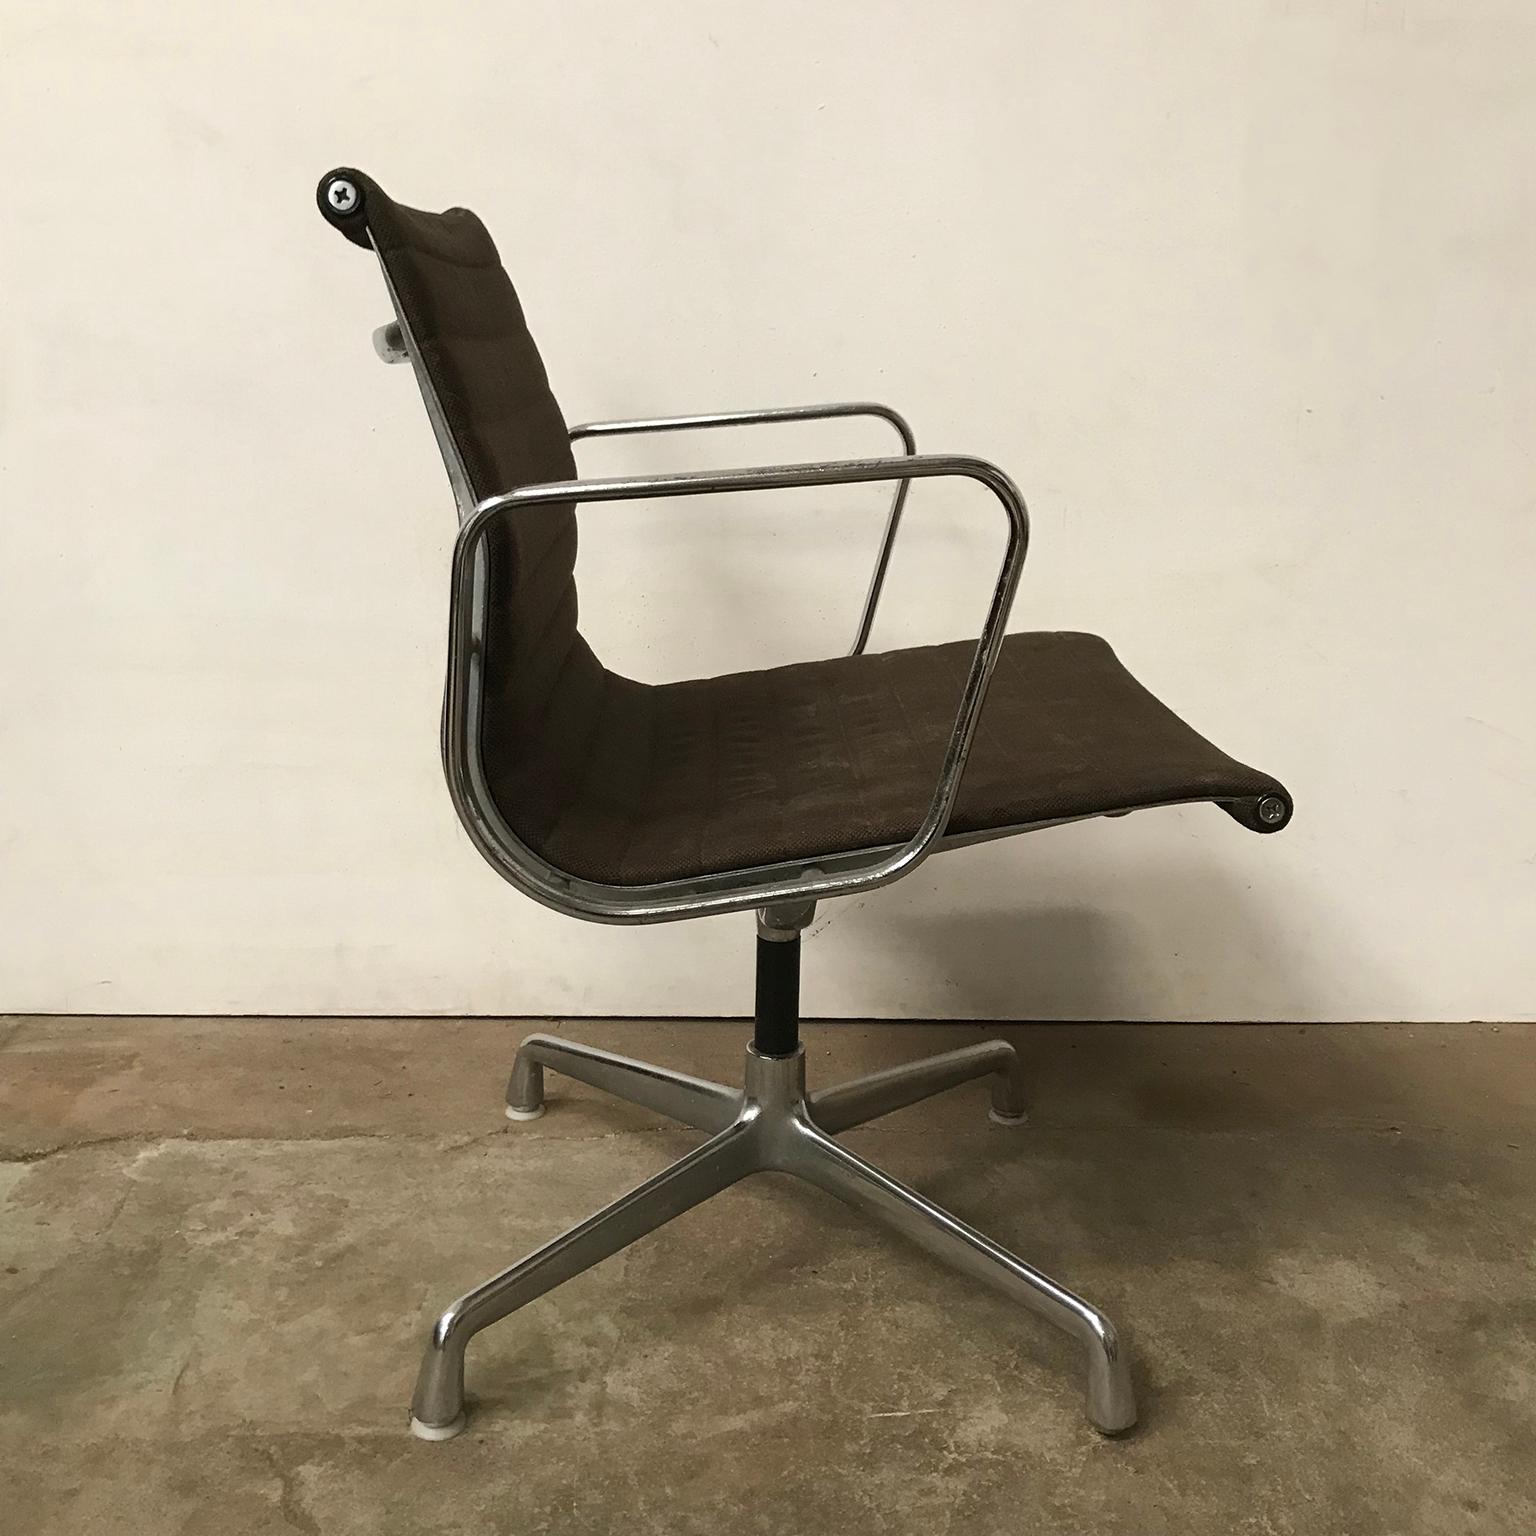 Brown EA 108 by Herman Miller with armrests and glossy base. The chair shows traces of wear like (moist) stains on the seat (pictures #7 - #10) and the base has some loss of chrome and some rusty spots (not rotating). Under the base is a brand and